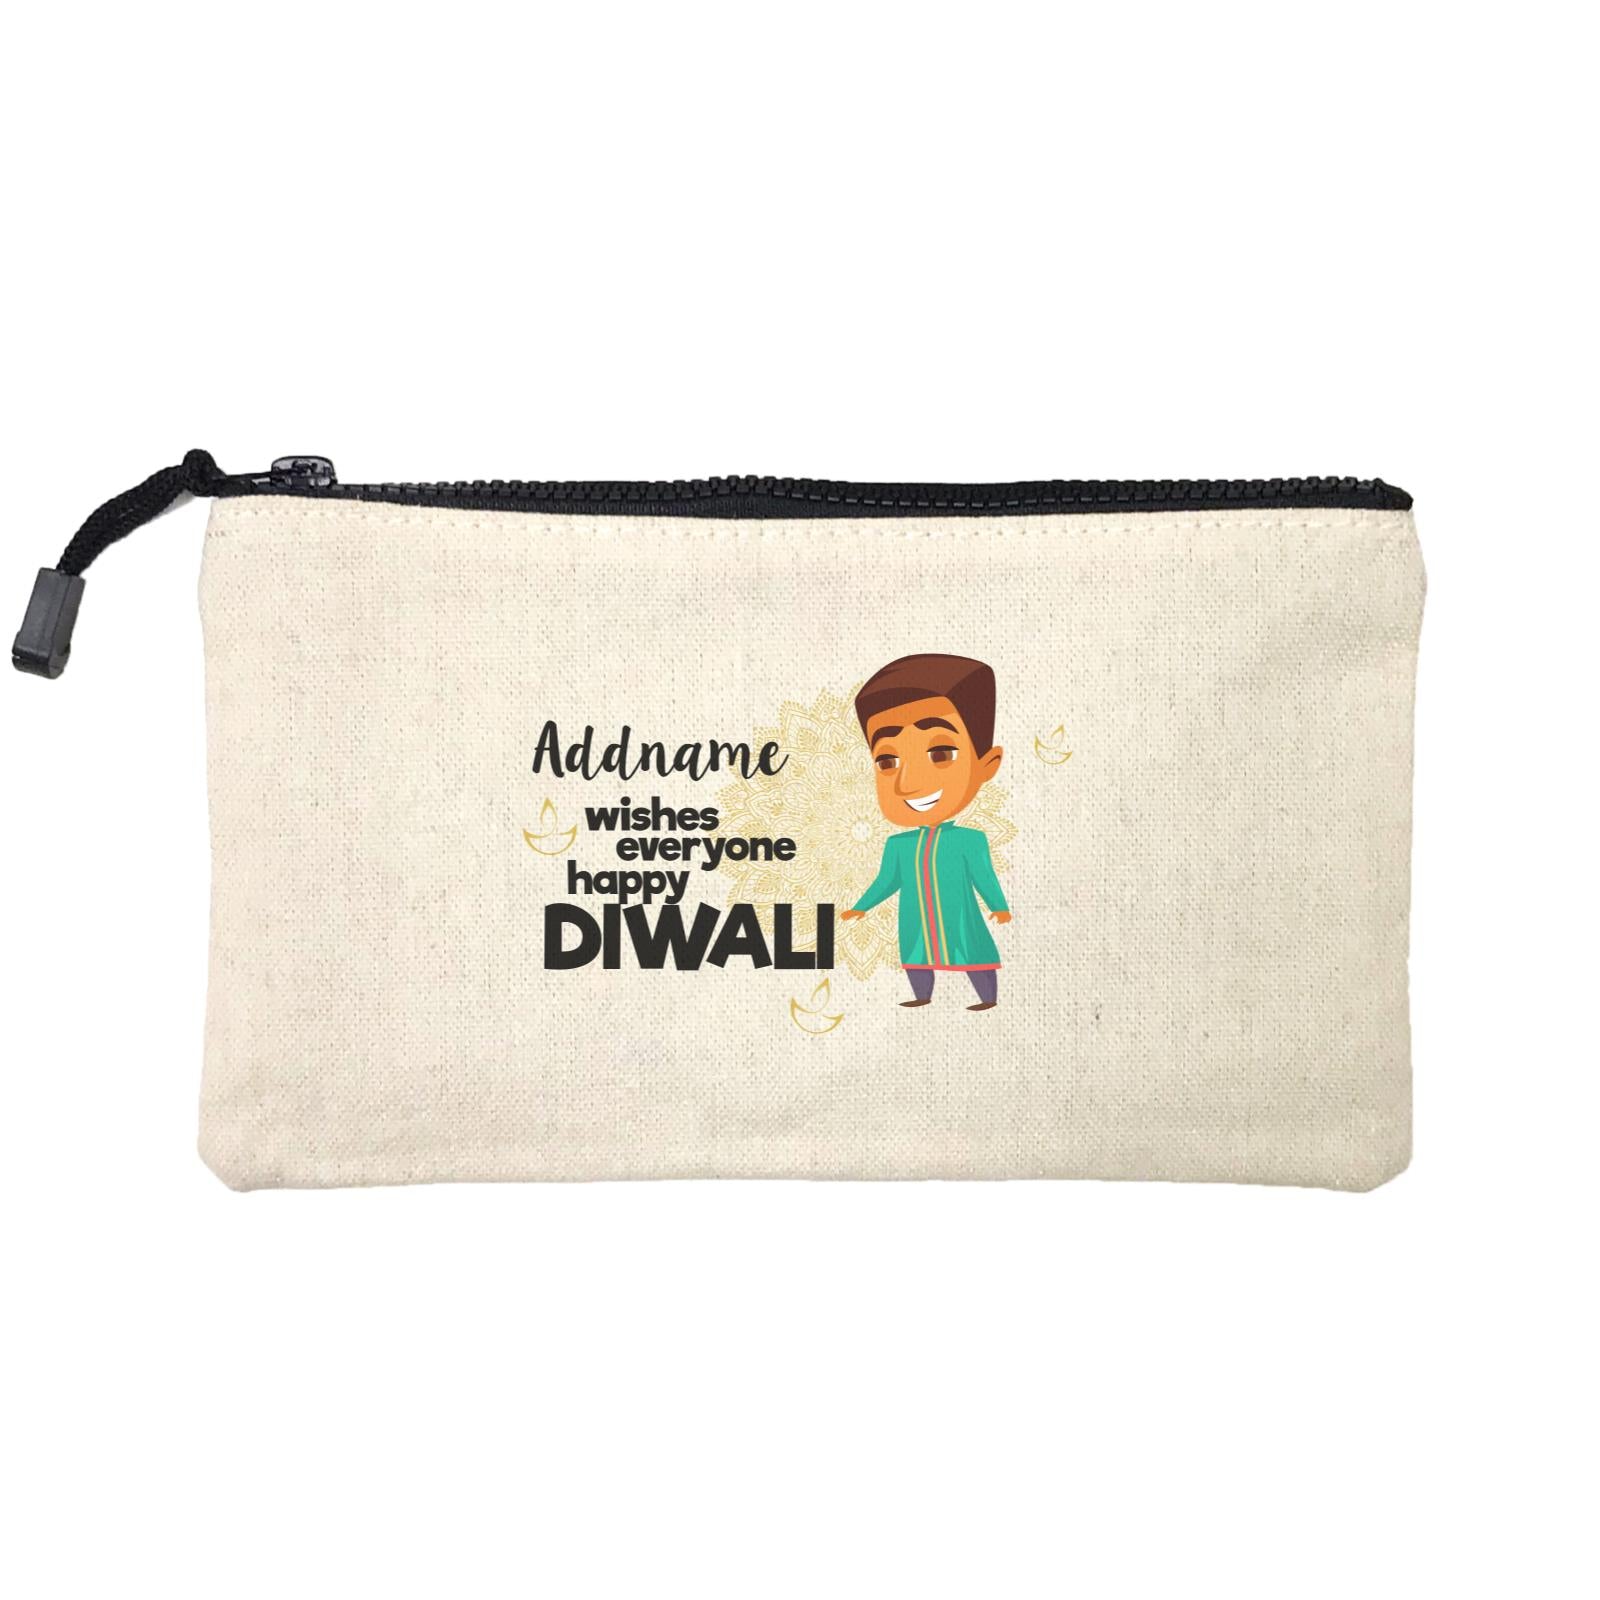 Cute Man Wishes Everyone Happy Diwali Addname Mini Accessories Stationery Pouch